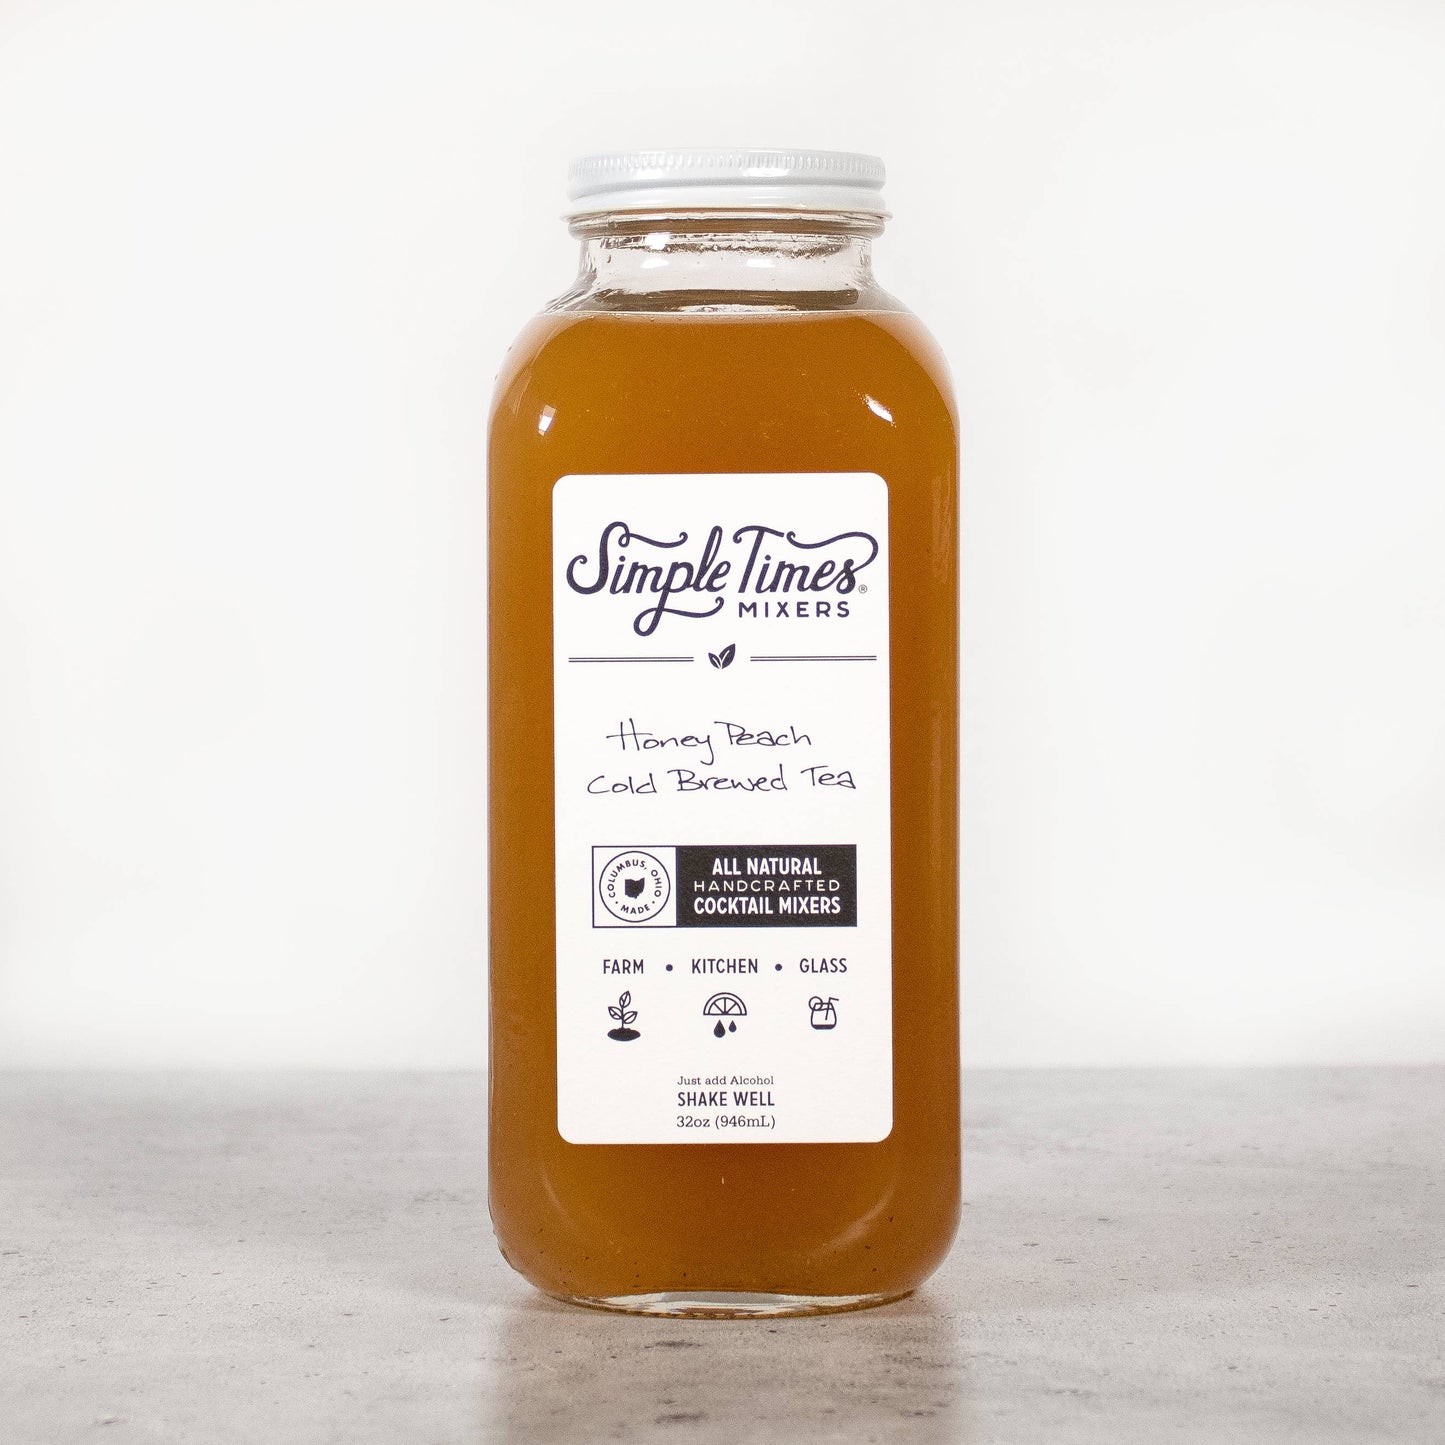 Simple Times Mixers Honey Peach Cold Brewed Tea